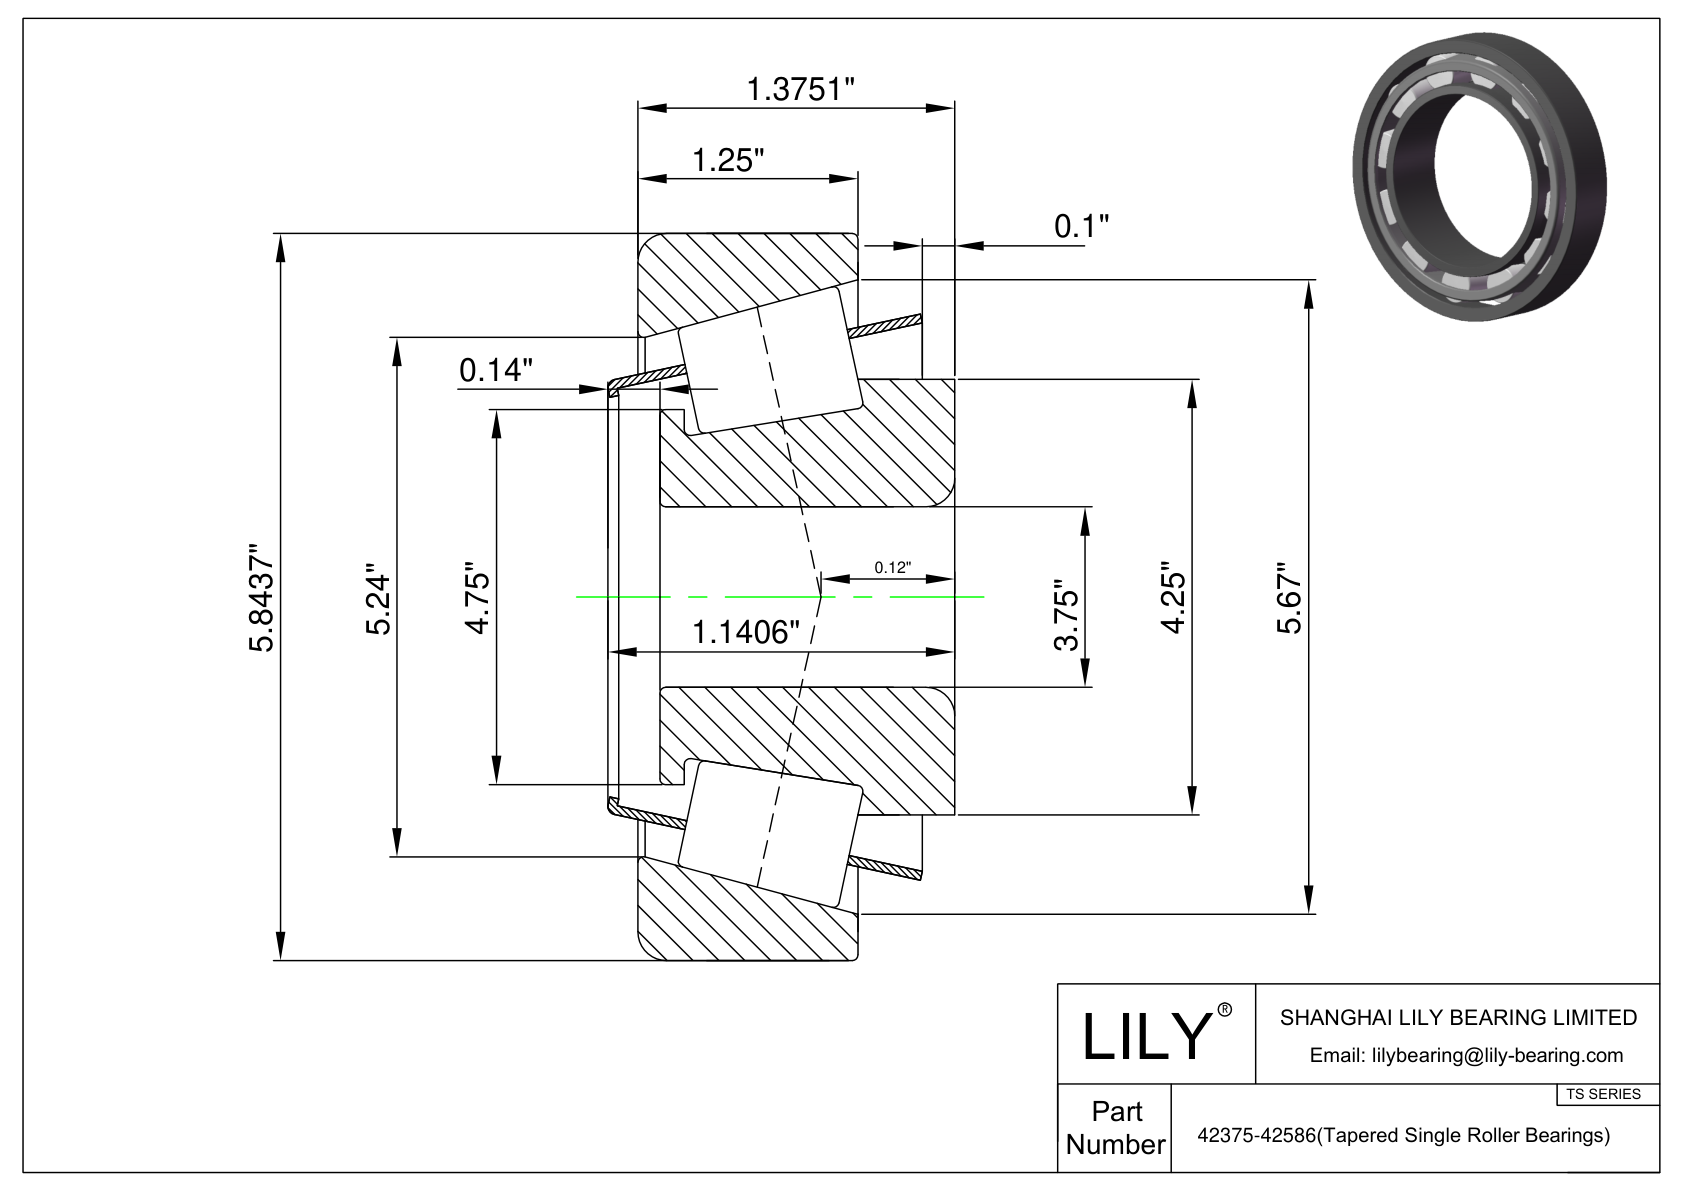 42375-42586 TS (Tapered Single Roller Bearings) (Imperial) cad drawing